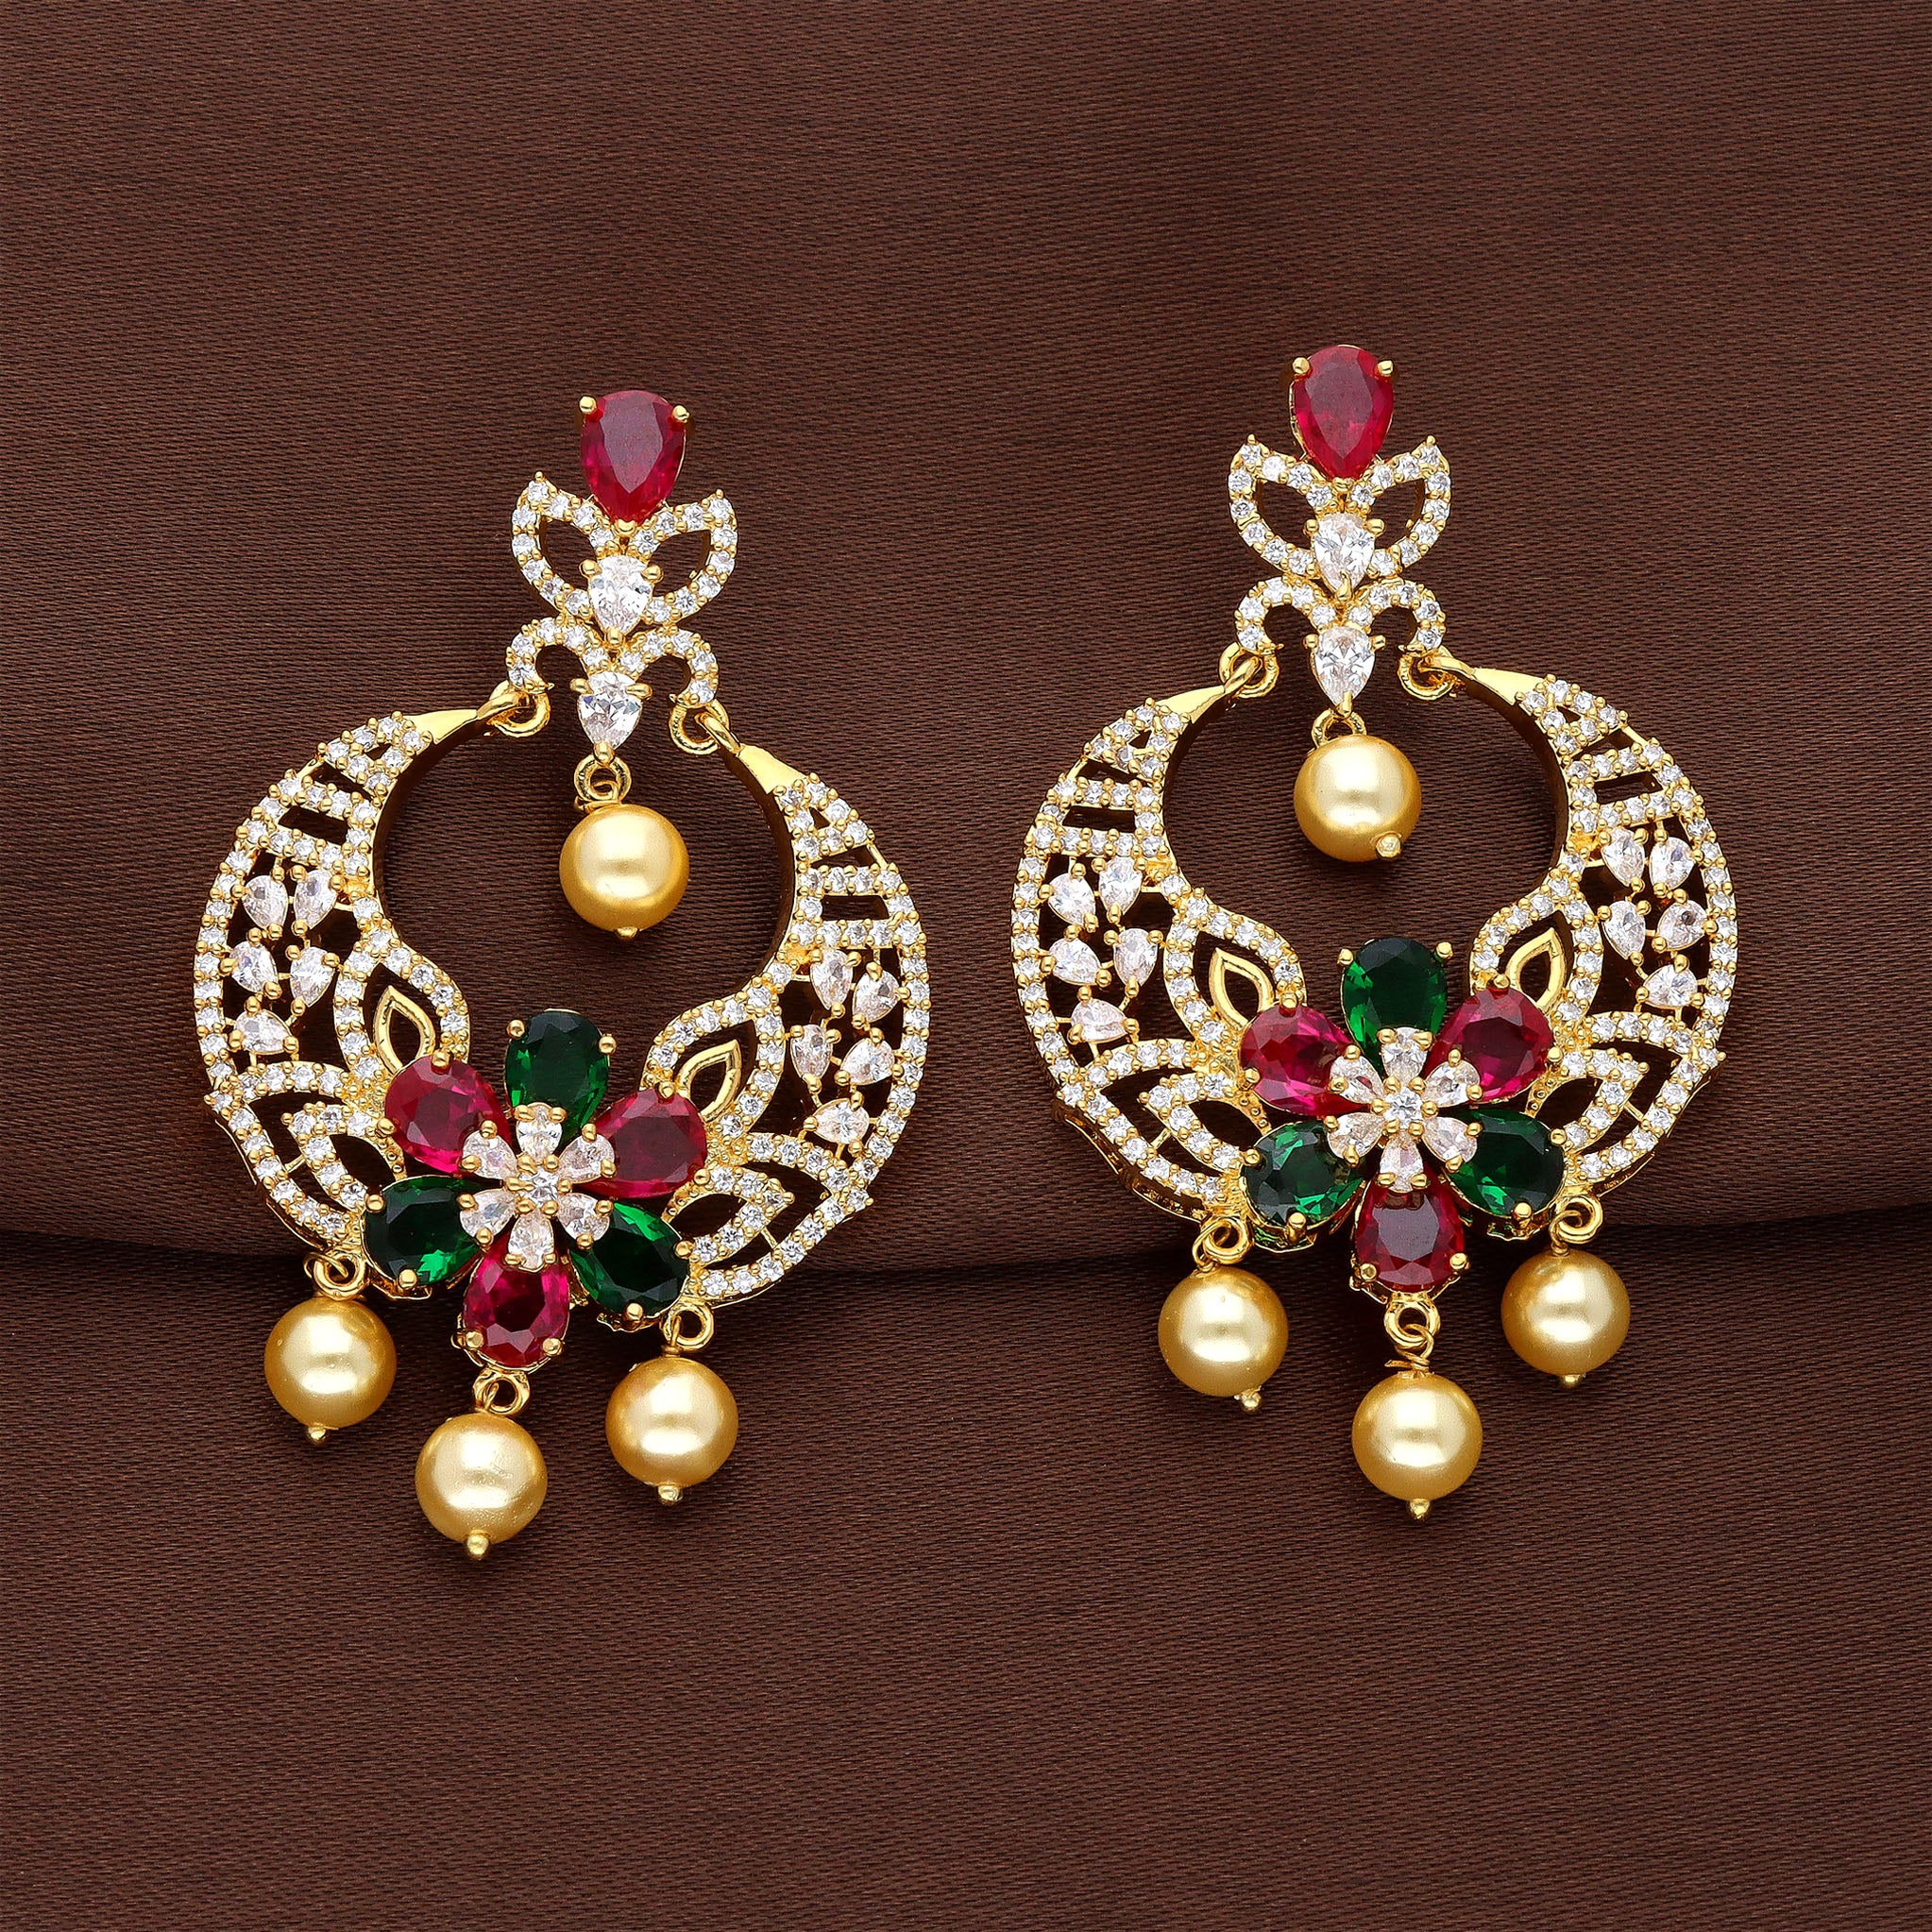 Gold earrings | New gold jewellery designs, Unique gold jewelry designs,  Gold bridal jewellery sets